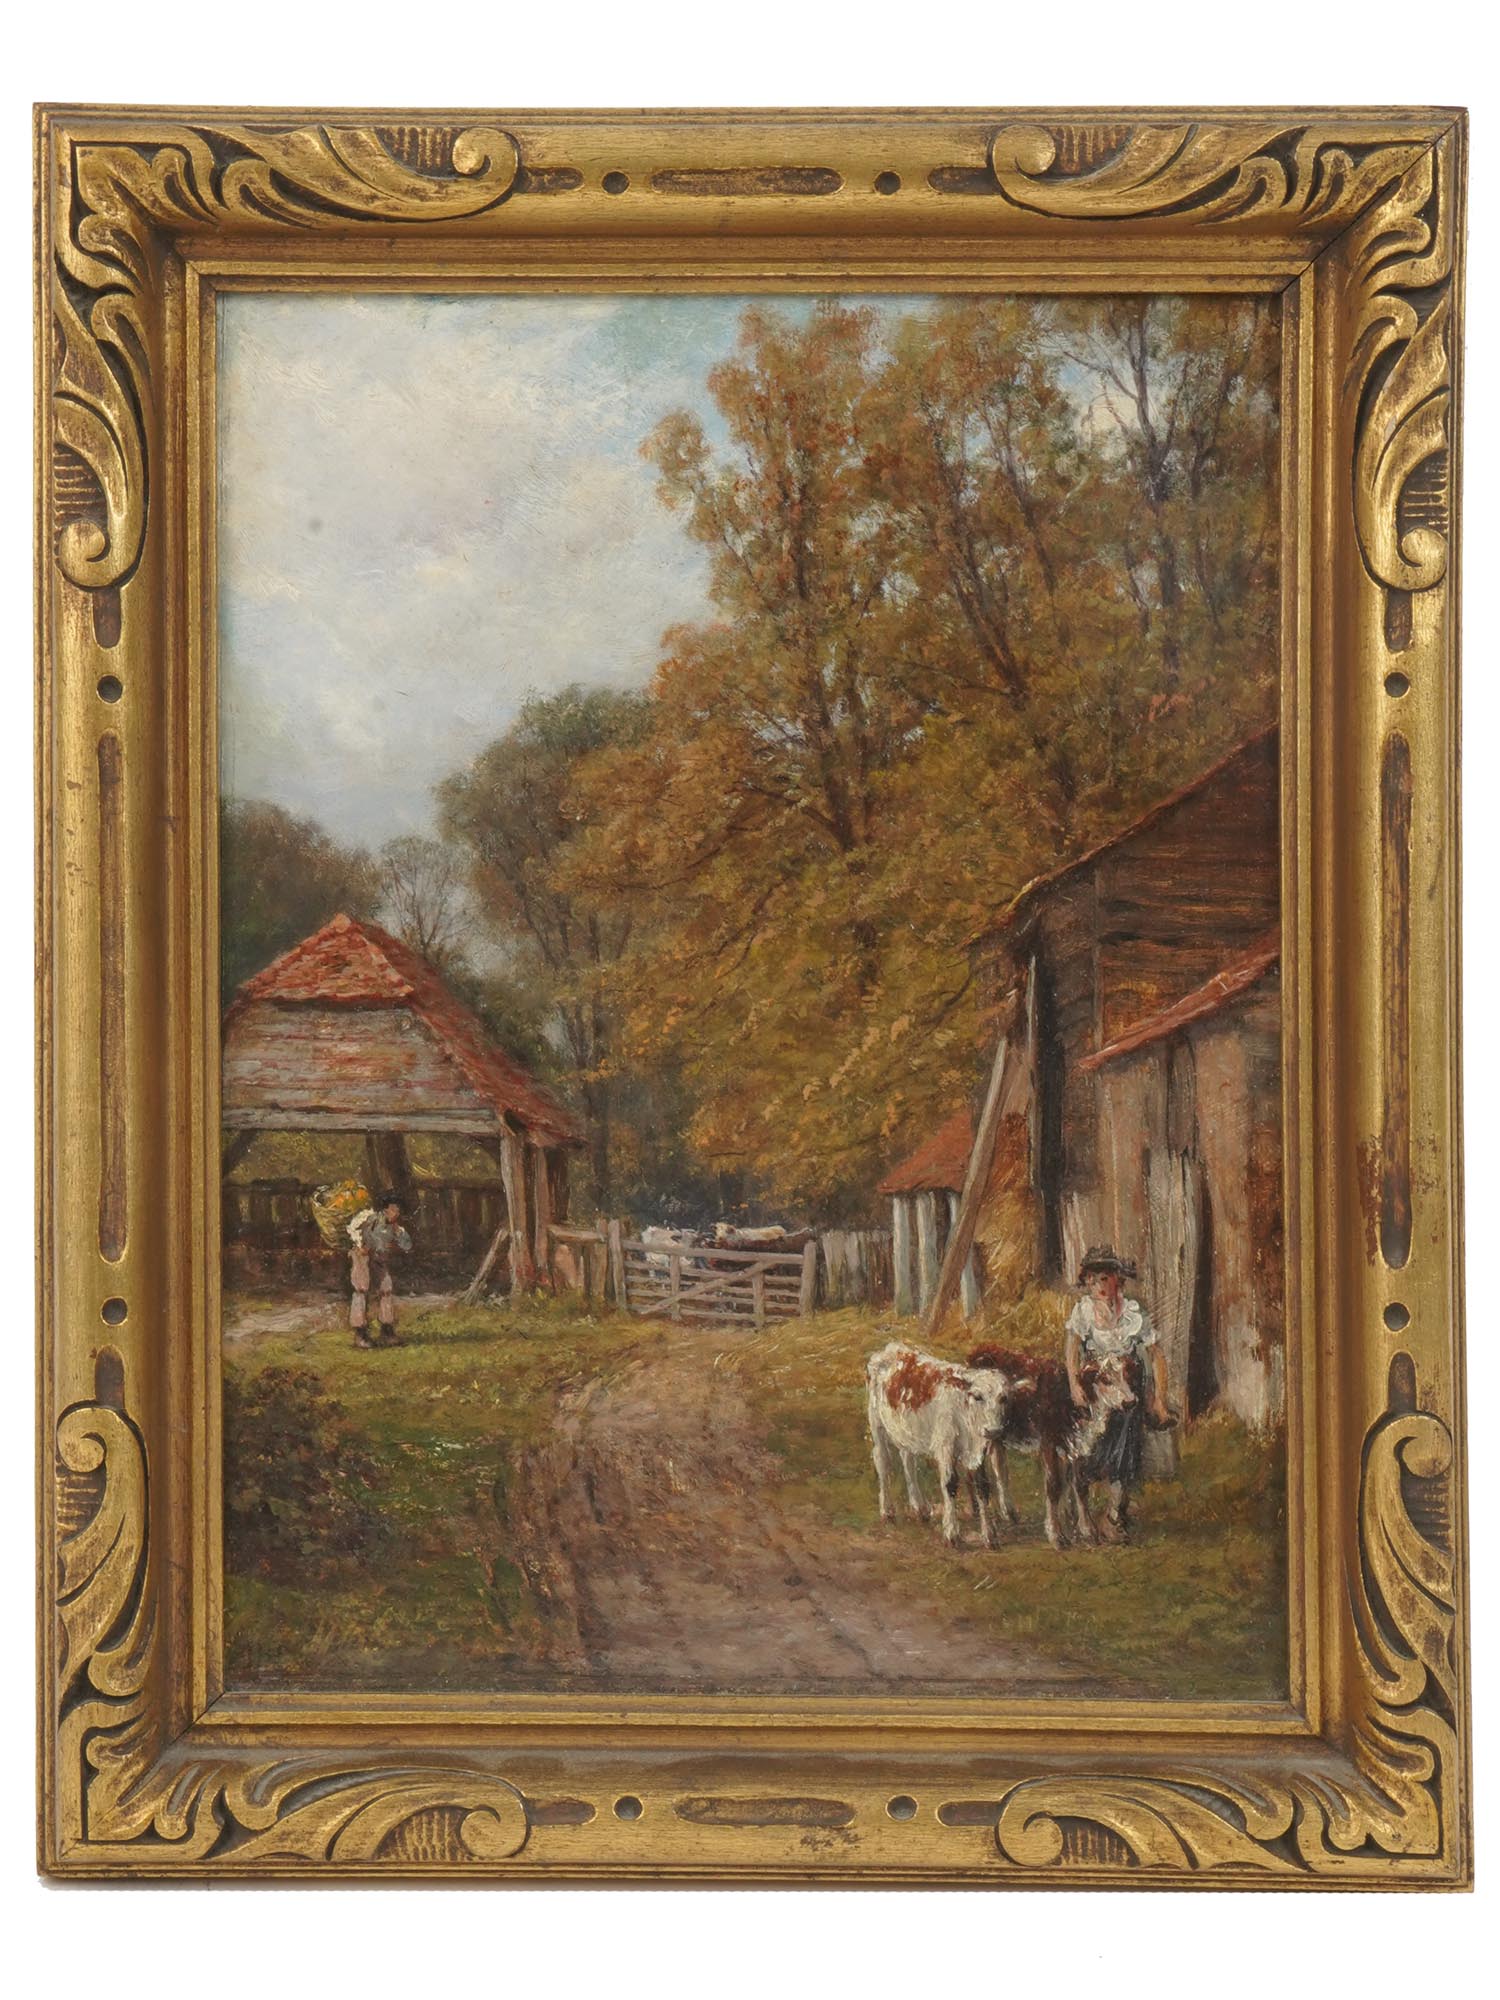 ANTIQUE BRITISH OIL PAINTING BY JOHN HENRY DEARLE PIC-0